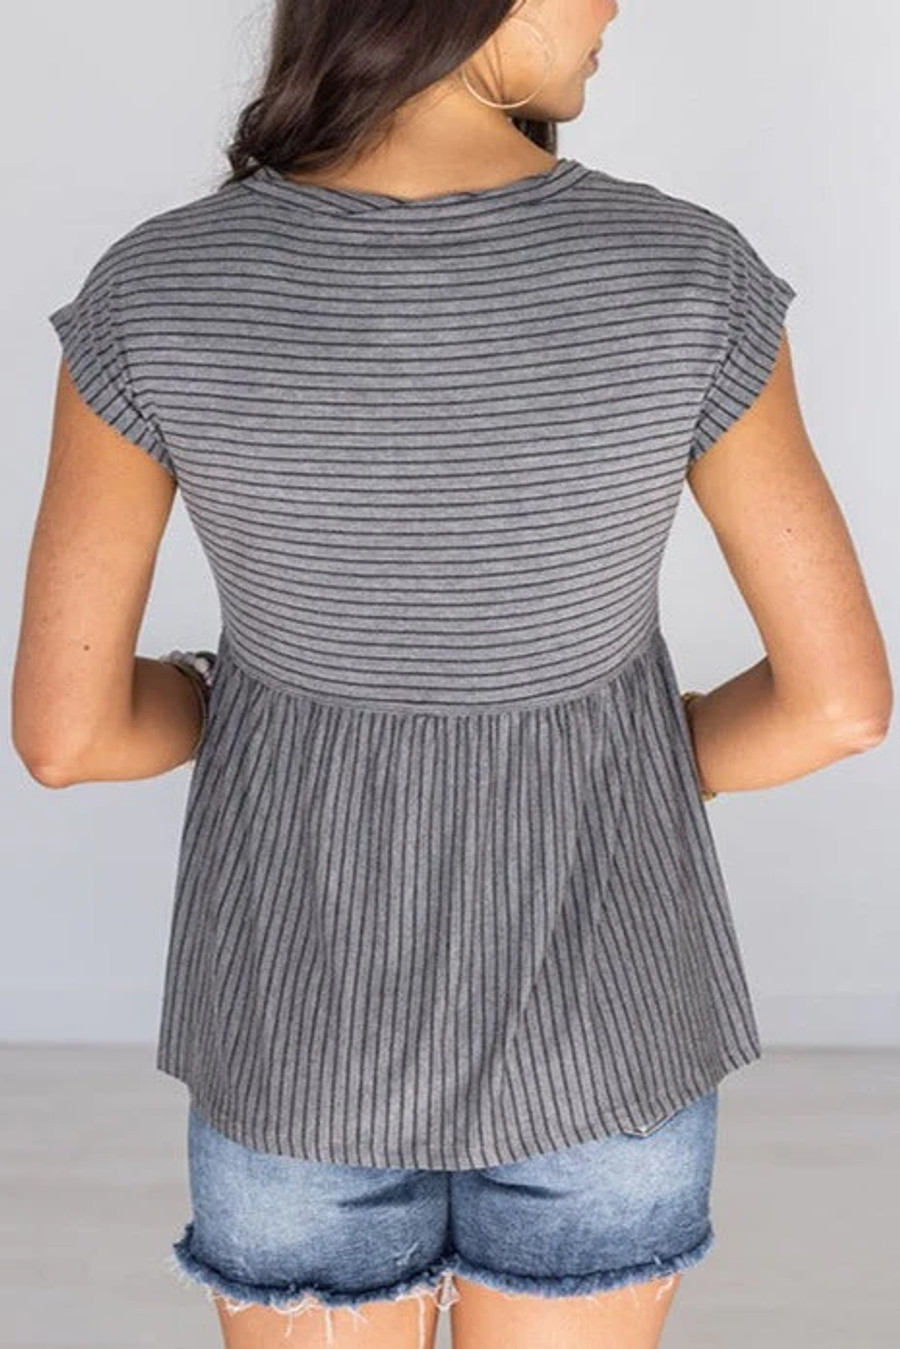 Grace and Lace- Baby Doll Tee in Tonal Grey Stripe